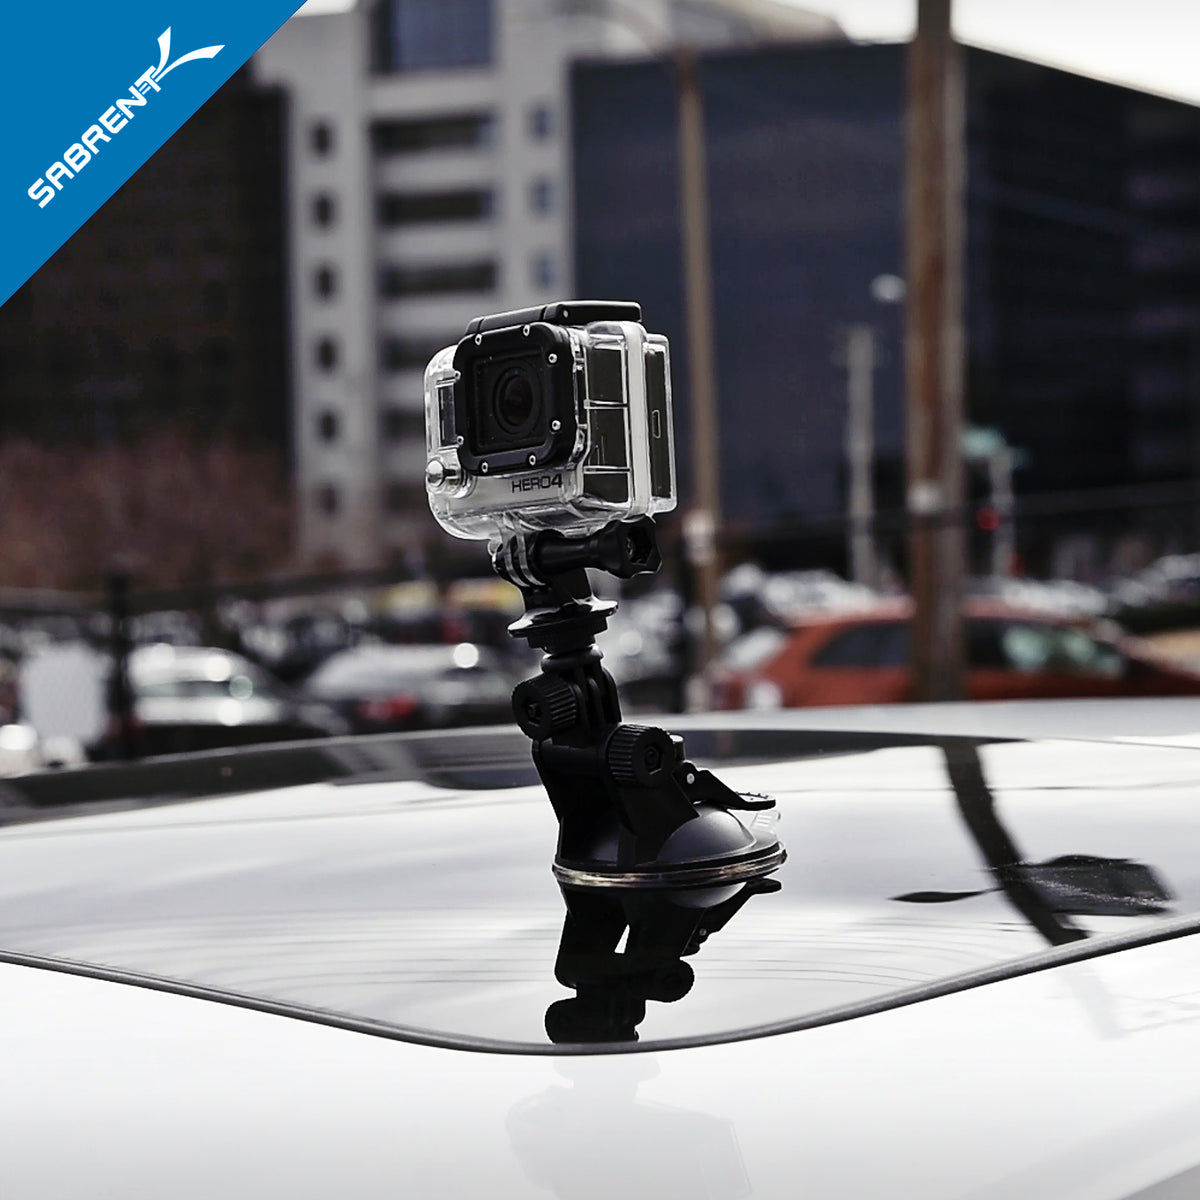 Mini Suction Cup for Standard Tripod Mount (GoPro Mount Adapter Included)